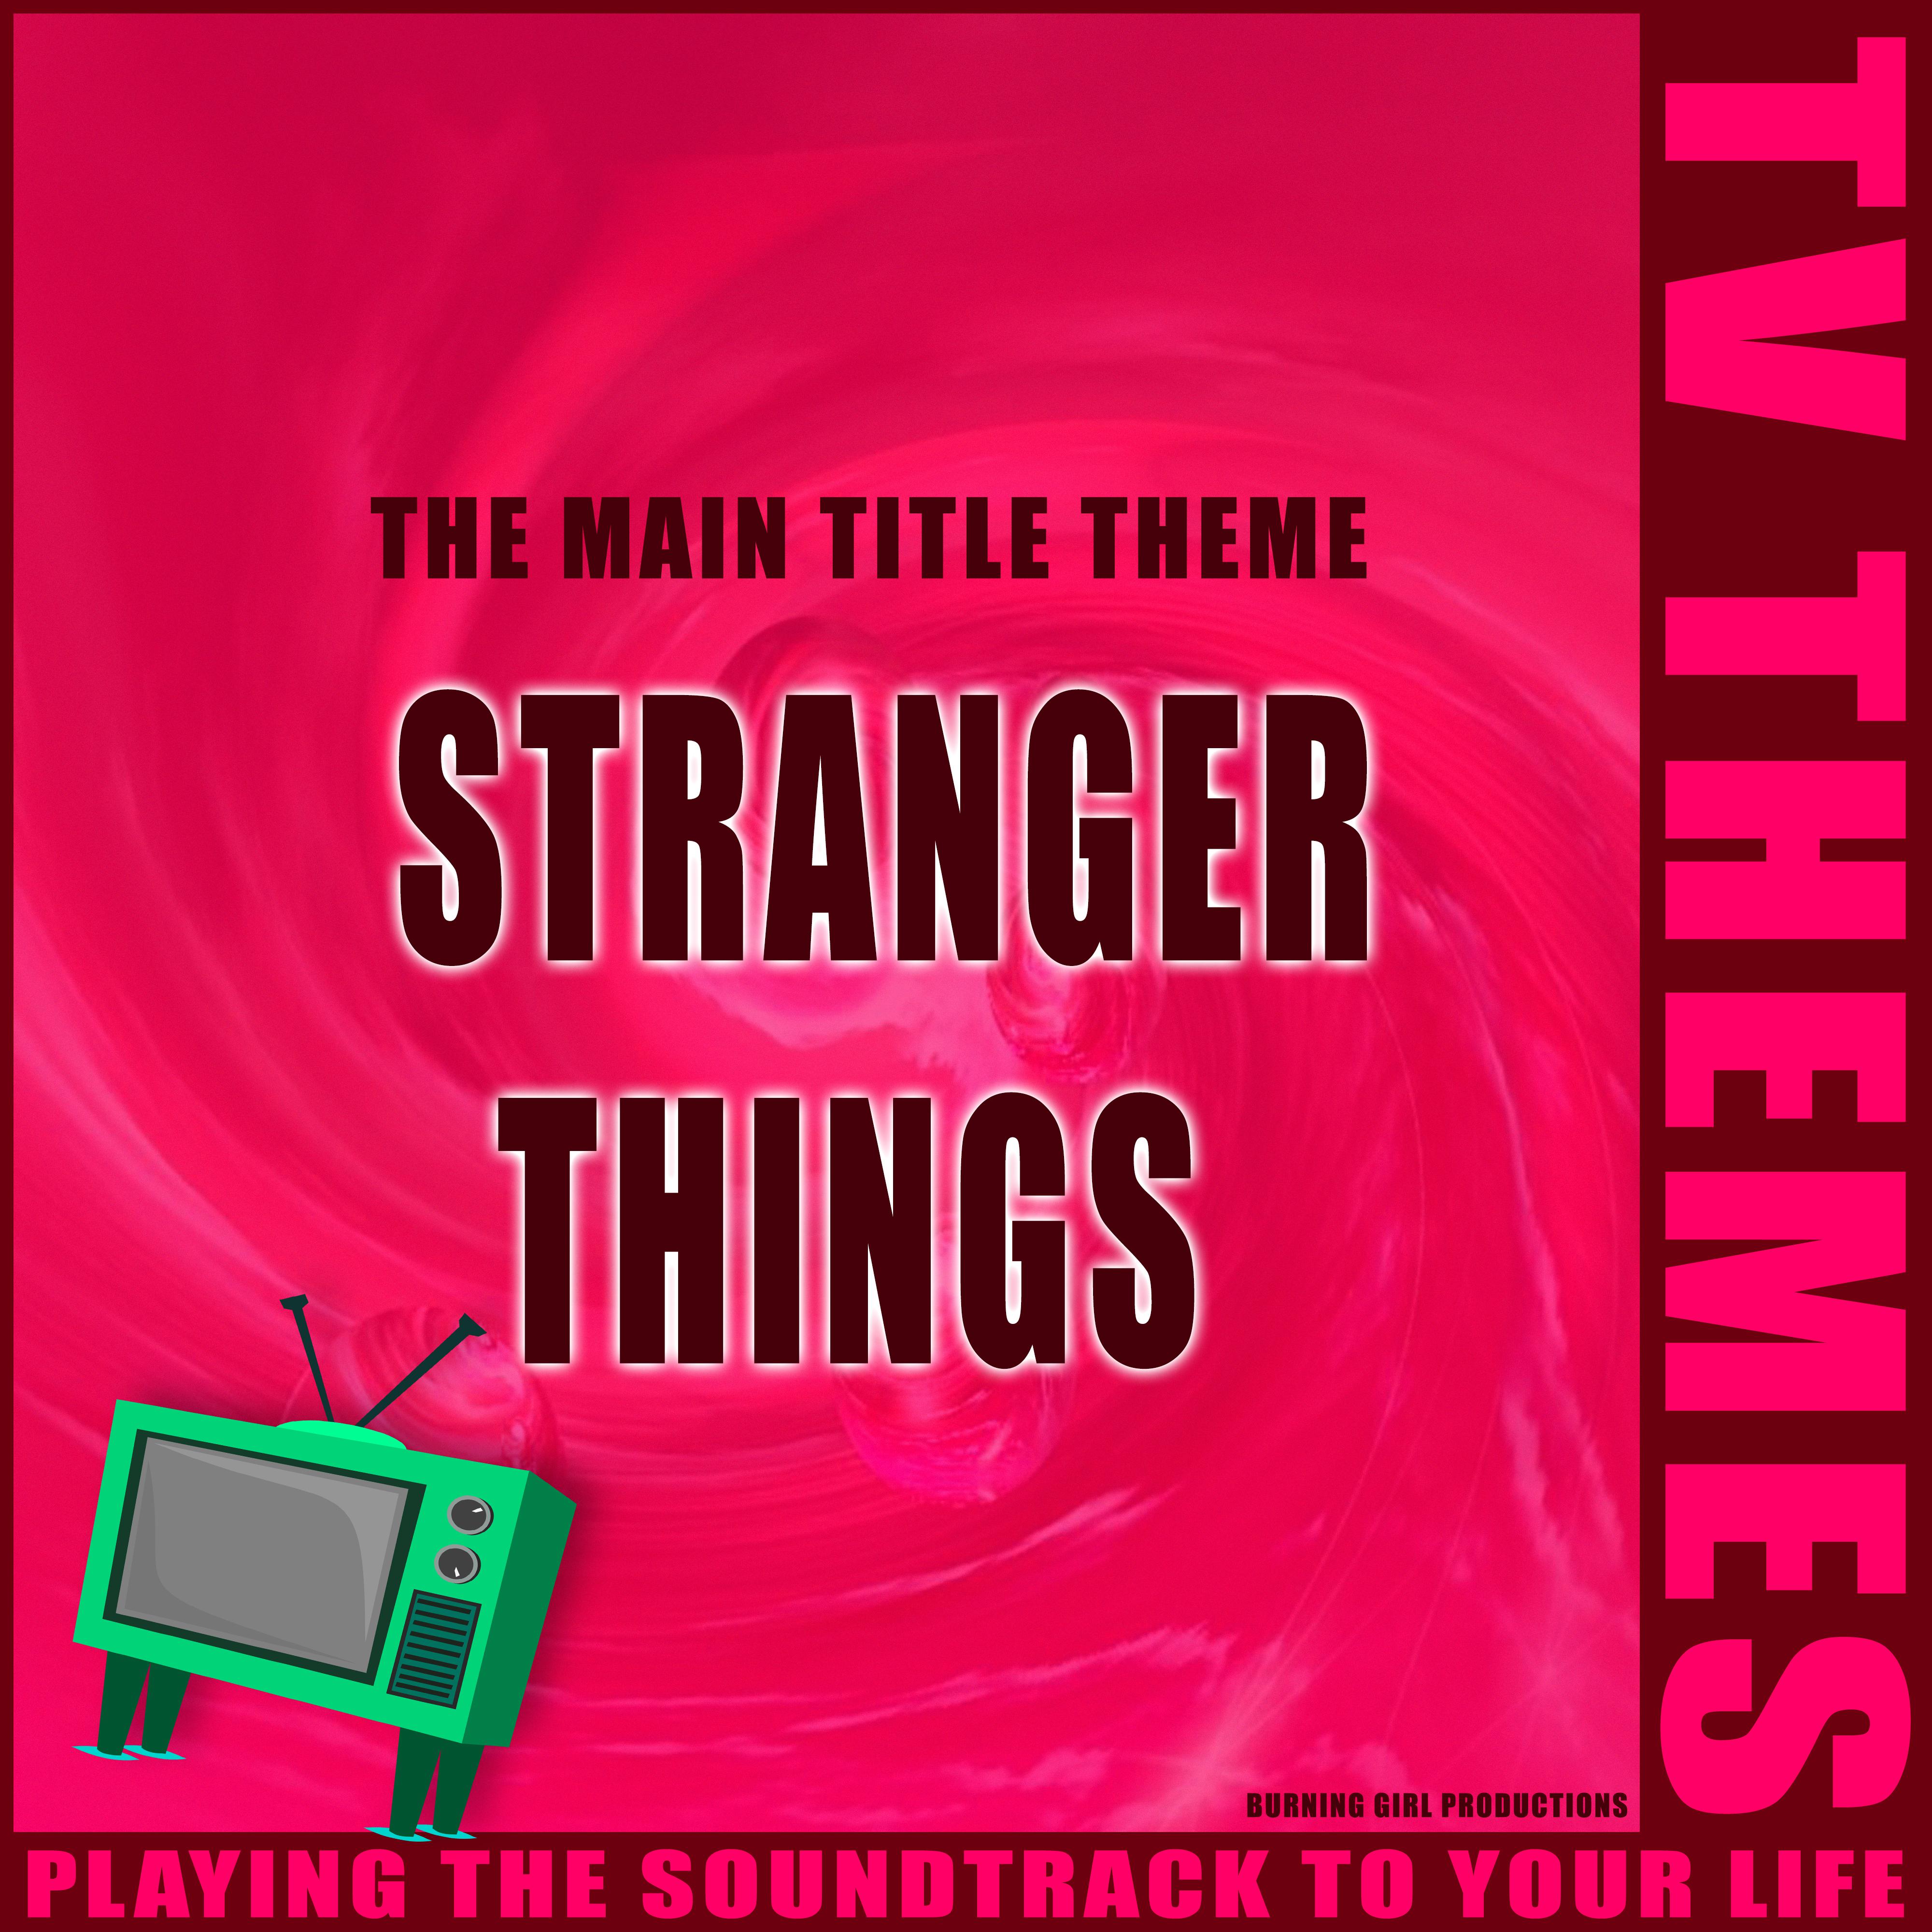 The Main Title Theme - Stranger Things